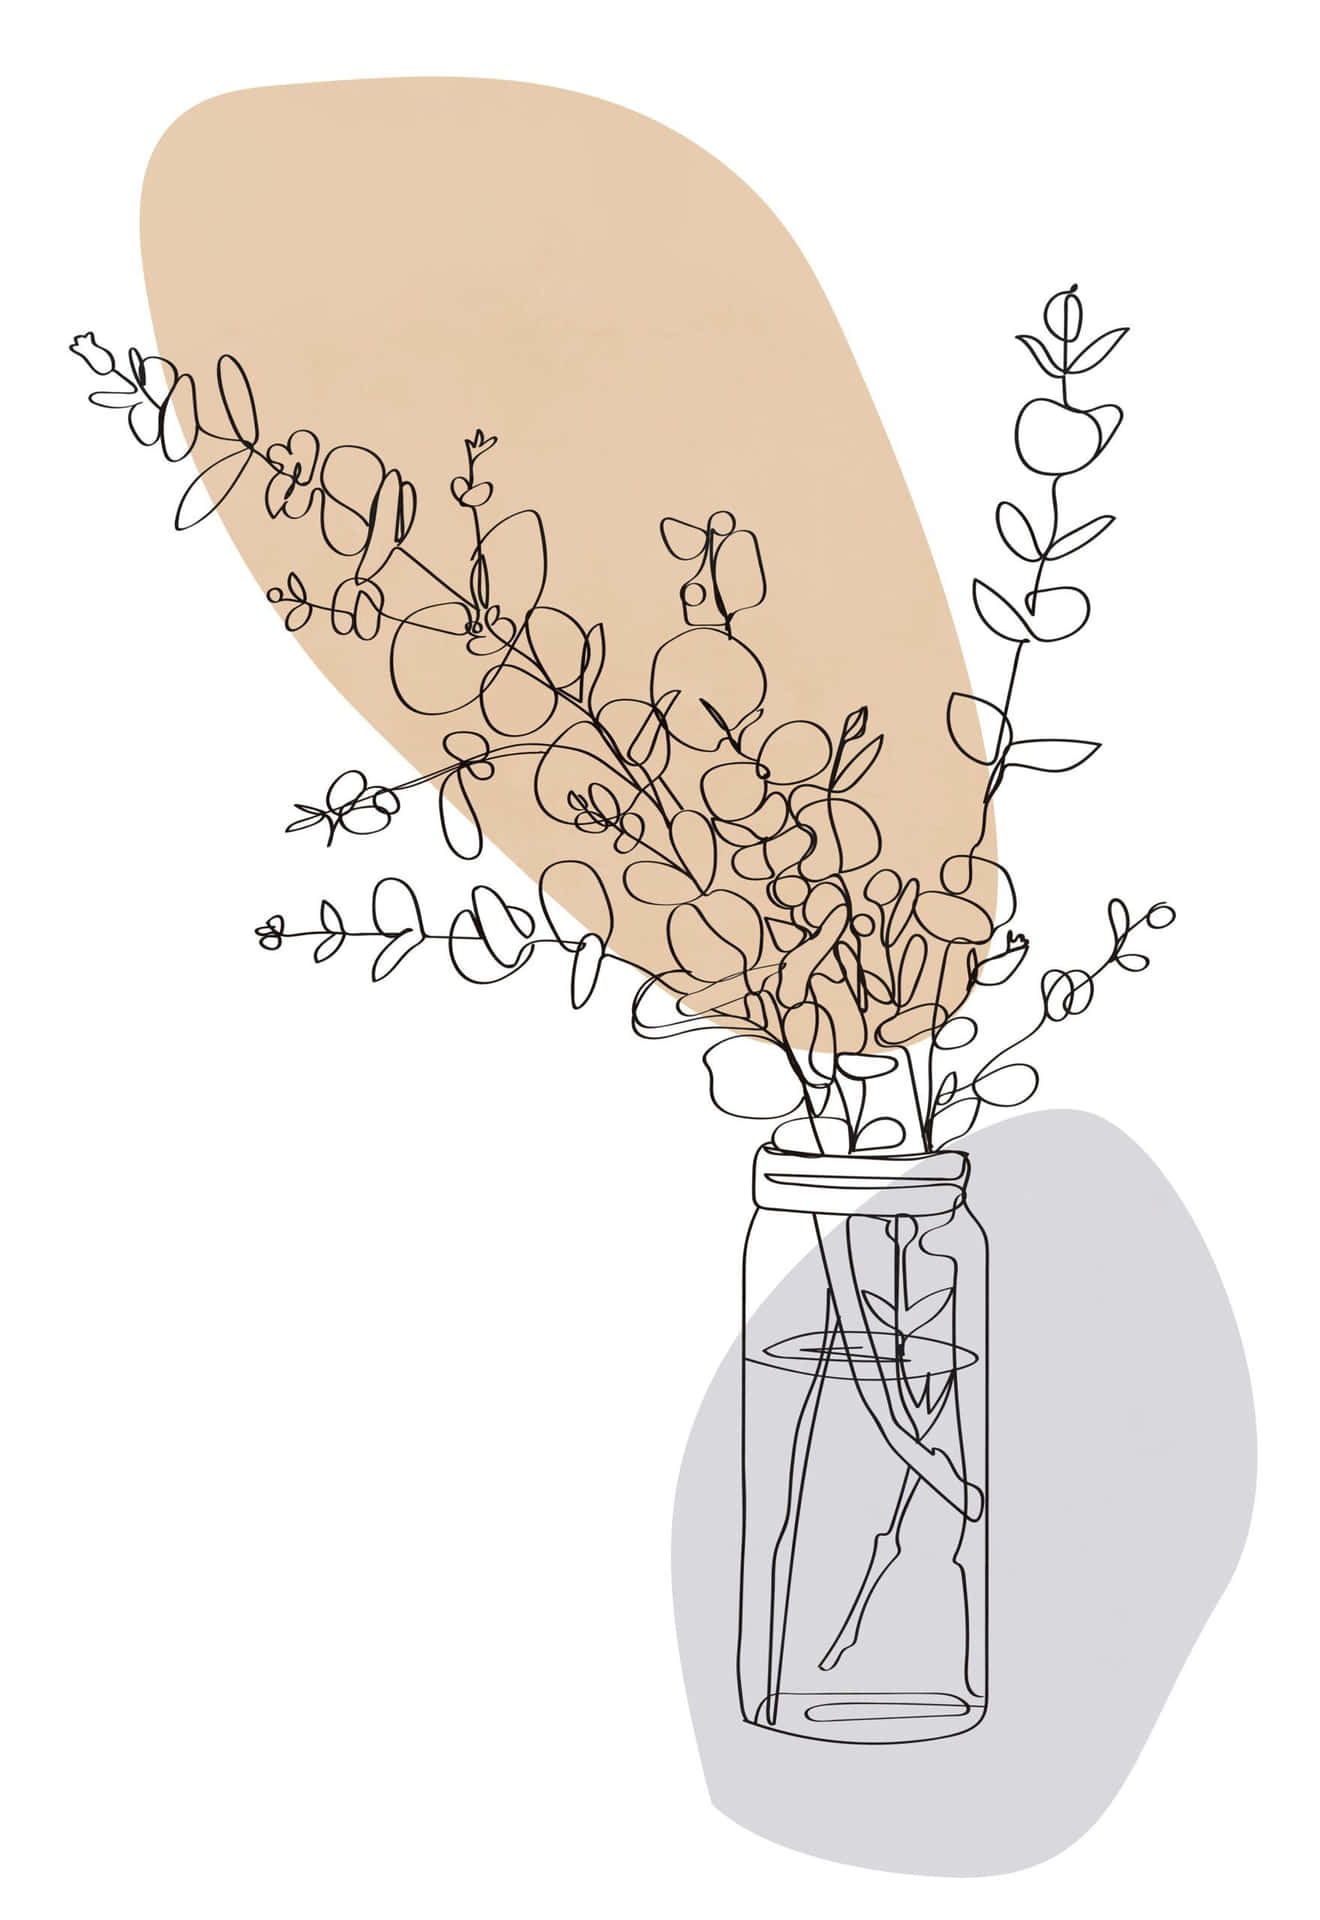 A Drawing Of A Vase With Flowers In It